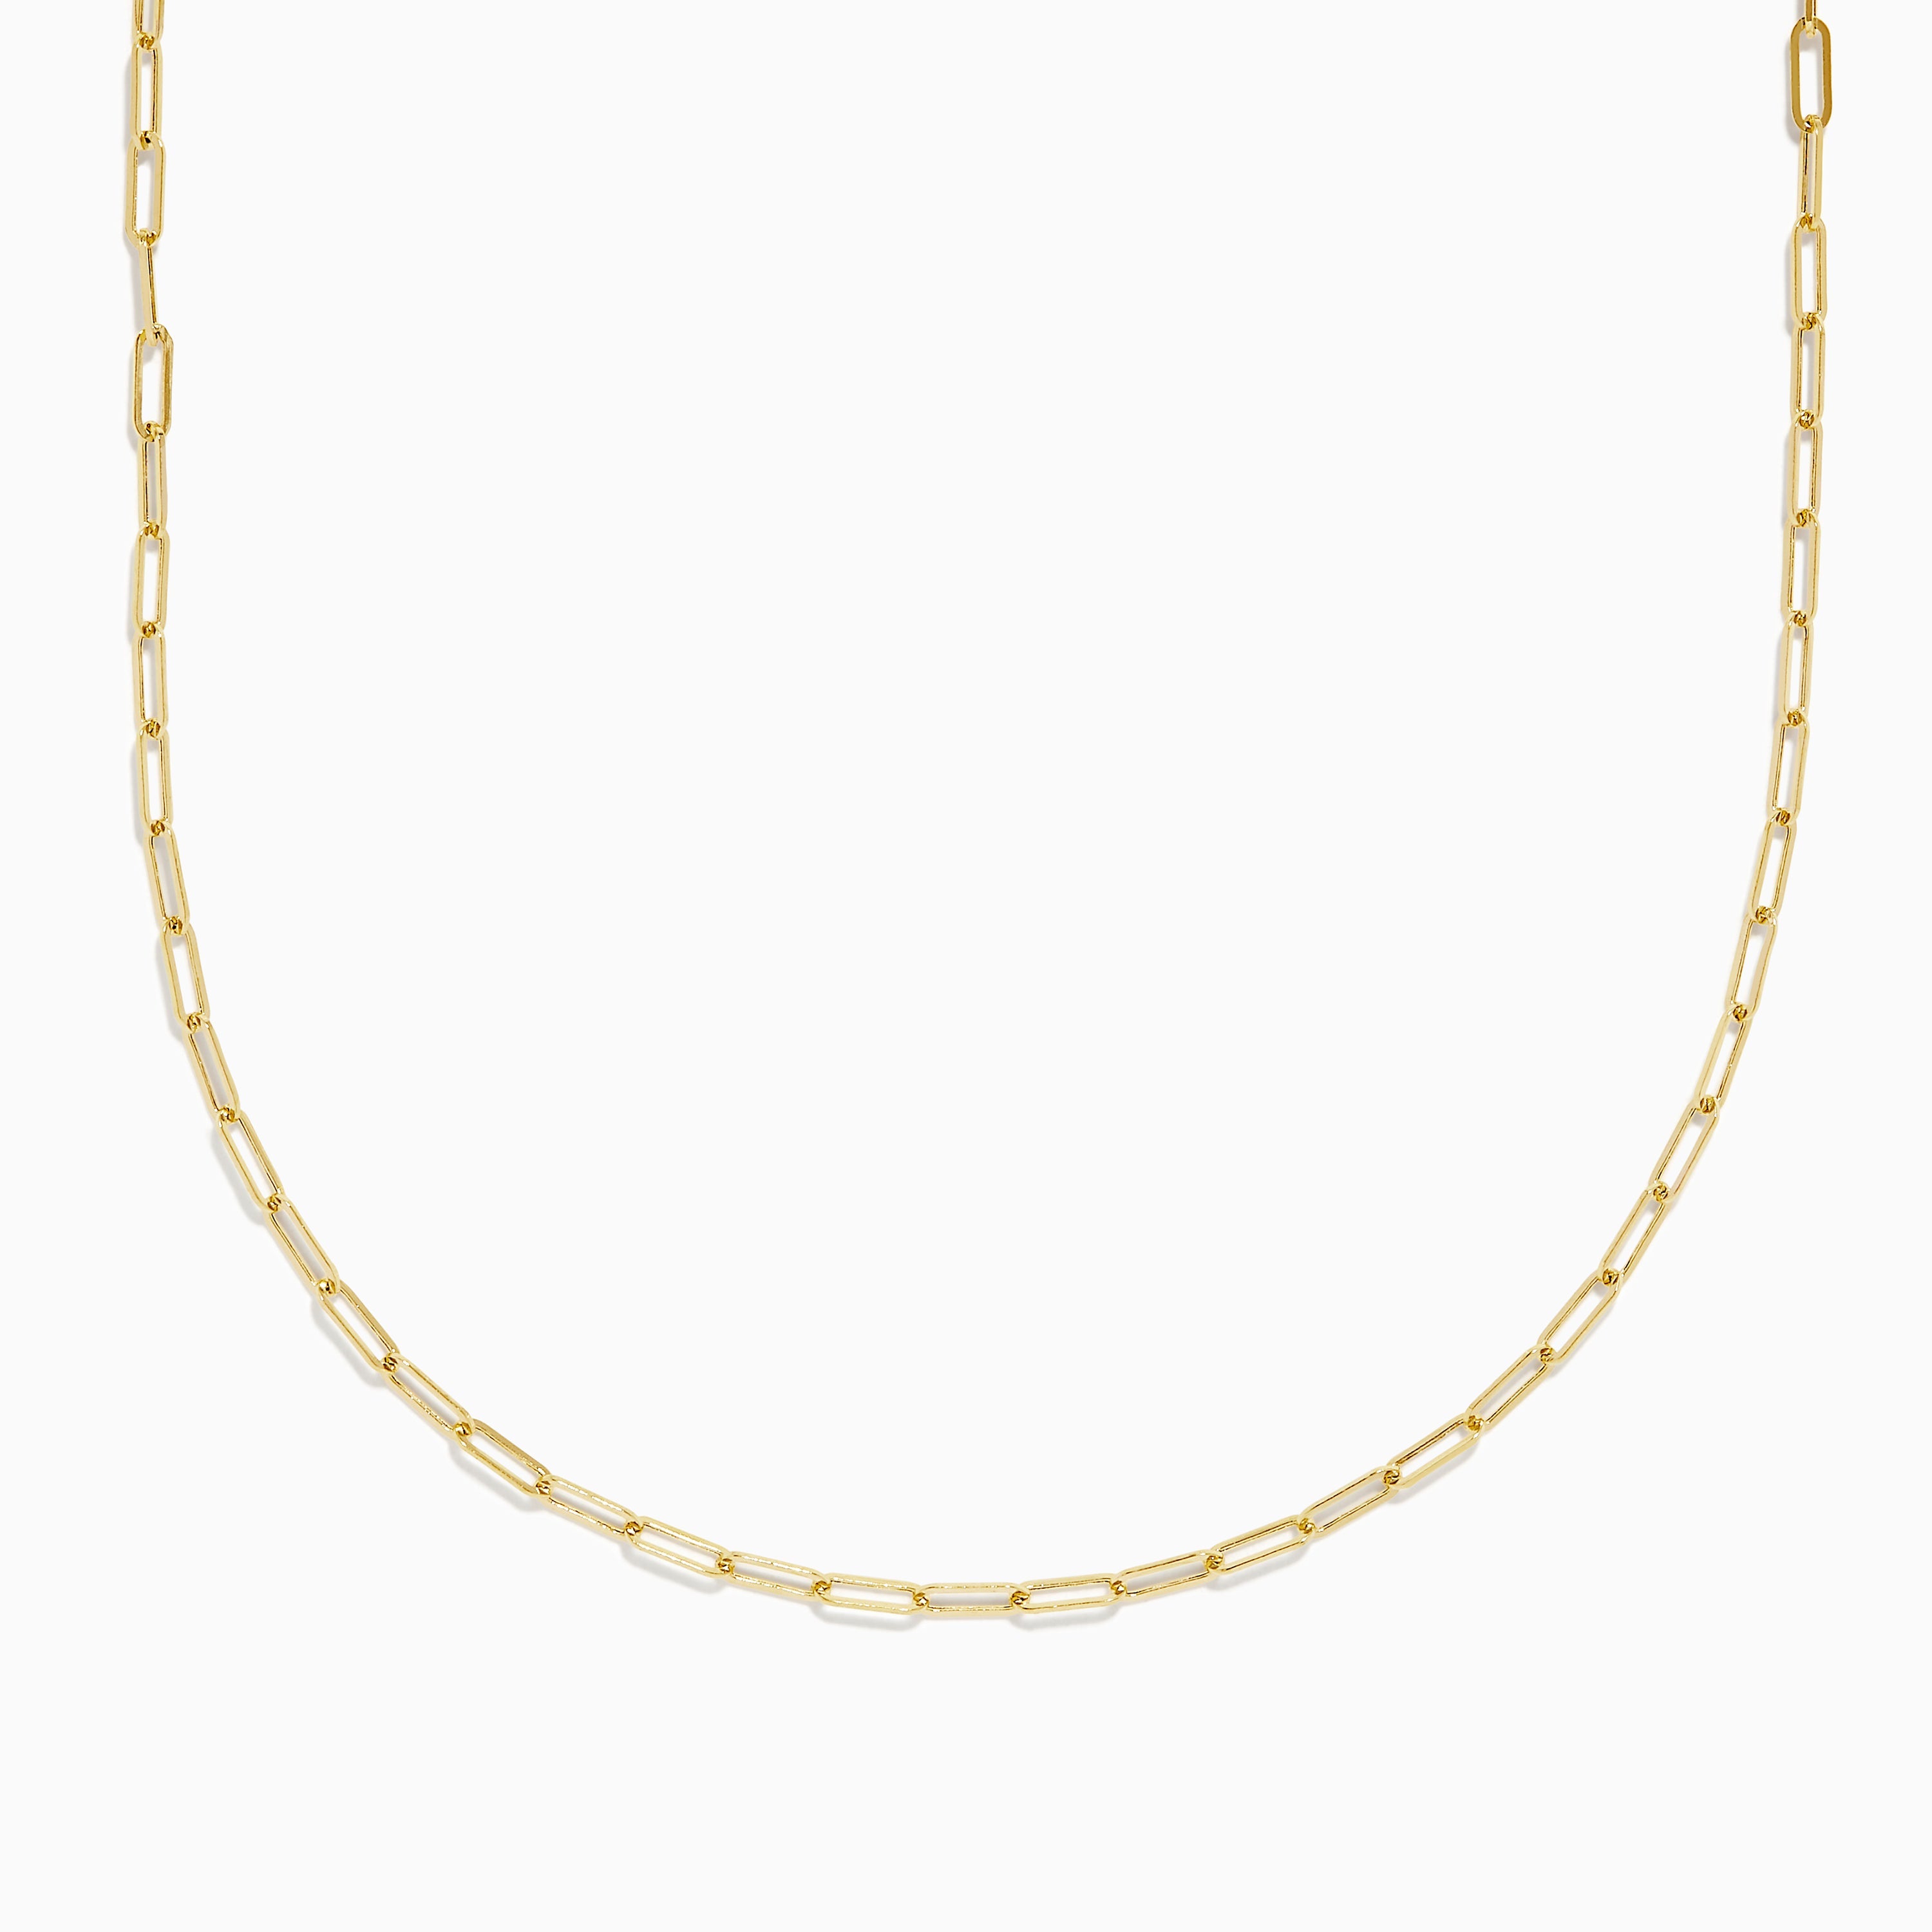 Effy 925 Sterling Silver Gold Plated Chain Link Necklace